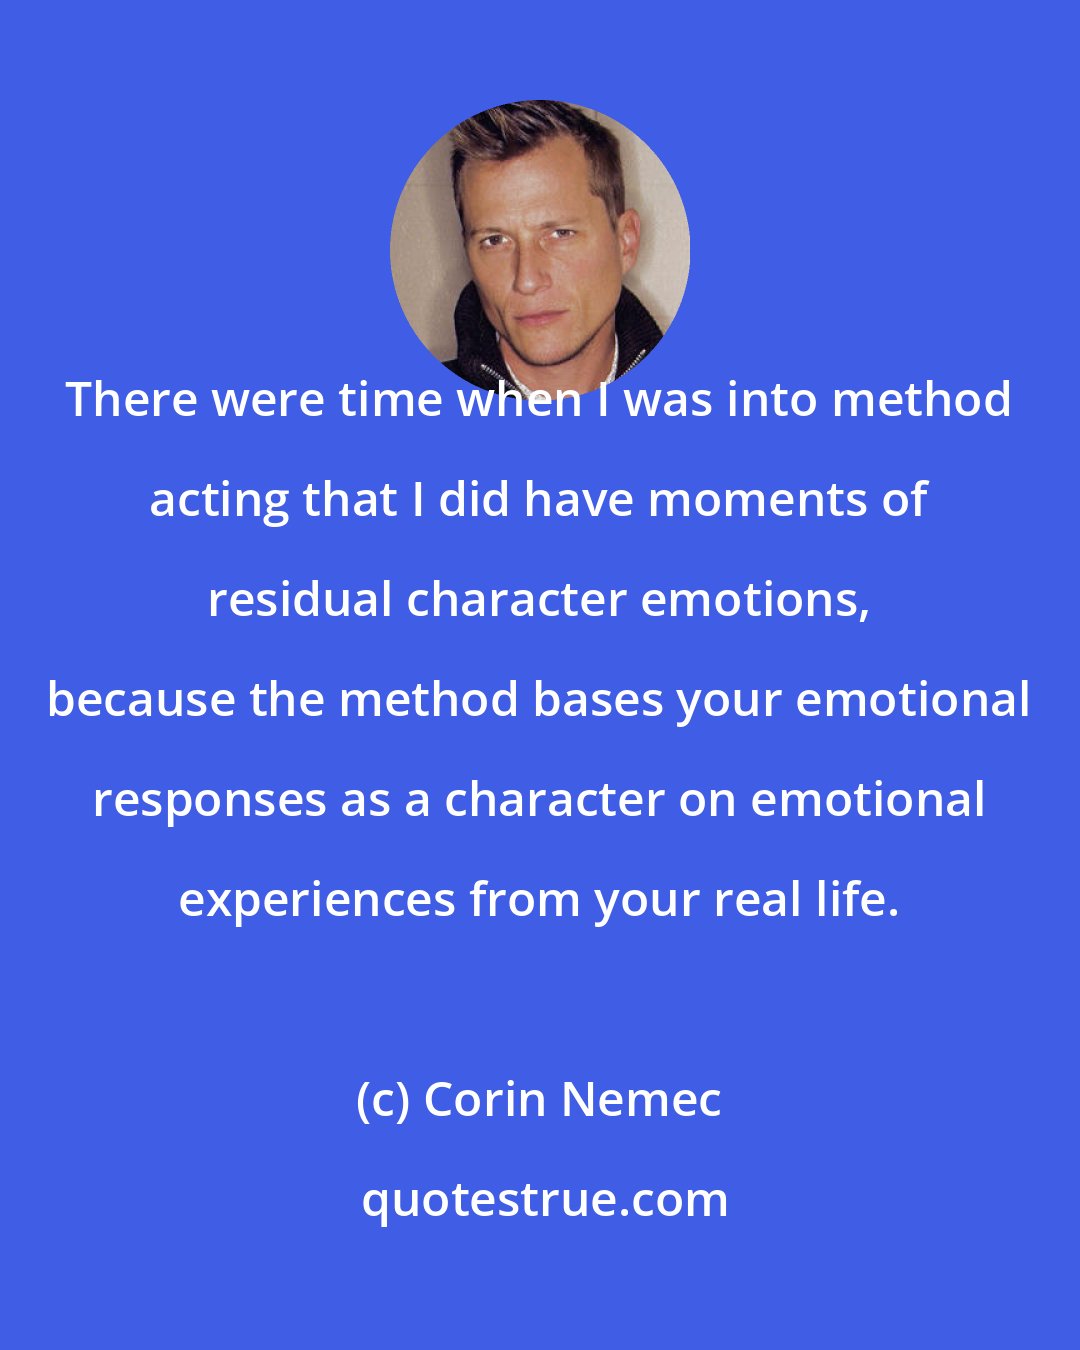 Corin Nemec: There were time when I was into method acting that I did have moments of residual character emotions, because the method bases your emotional responses as a character on emotional experiences from your real life.